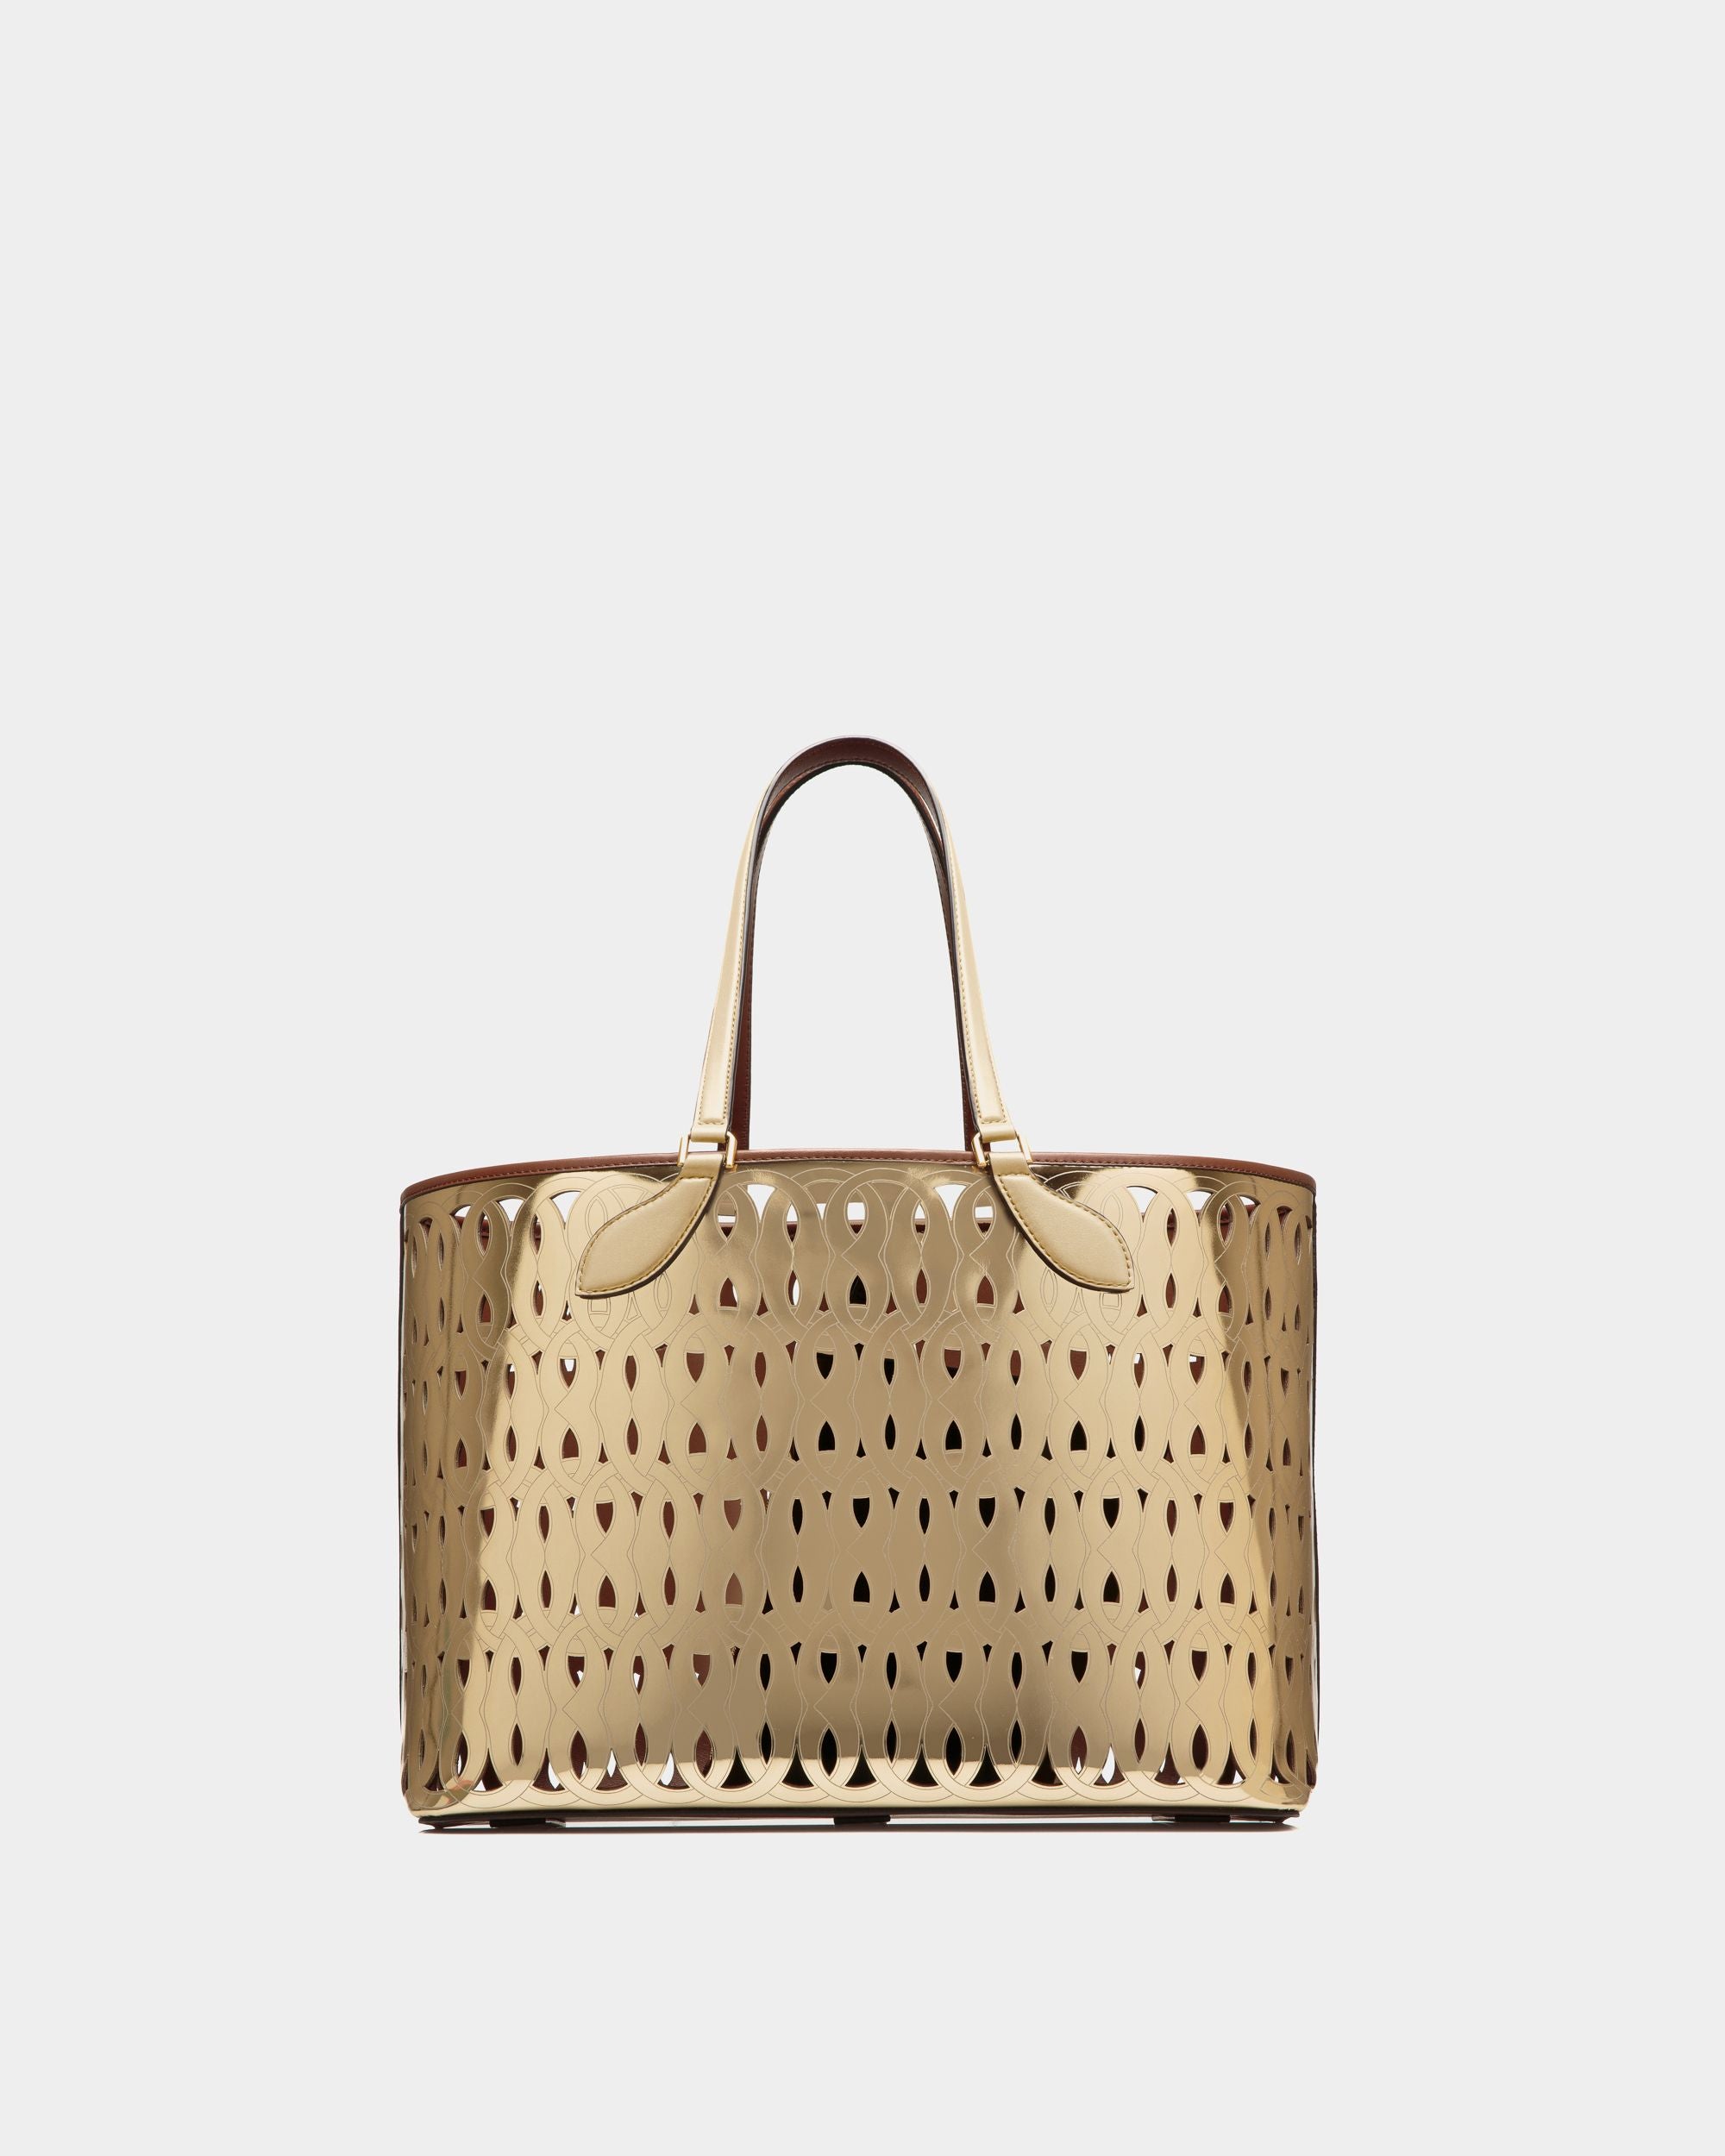 Lago | Women's Tote Bag in Gold Patent Leather | Bally | Still Life Front